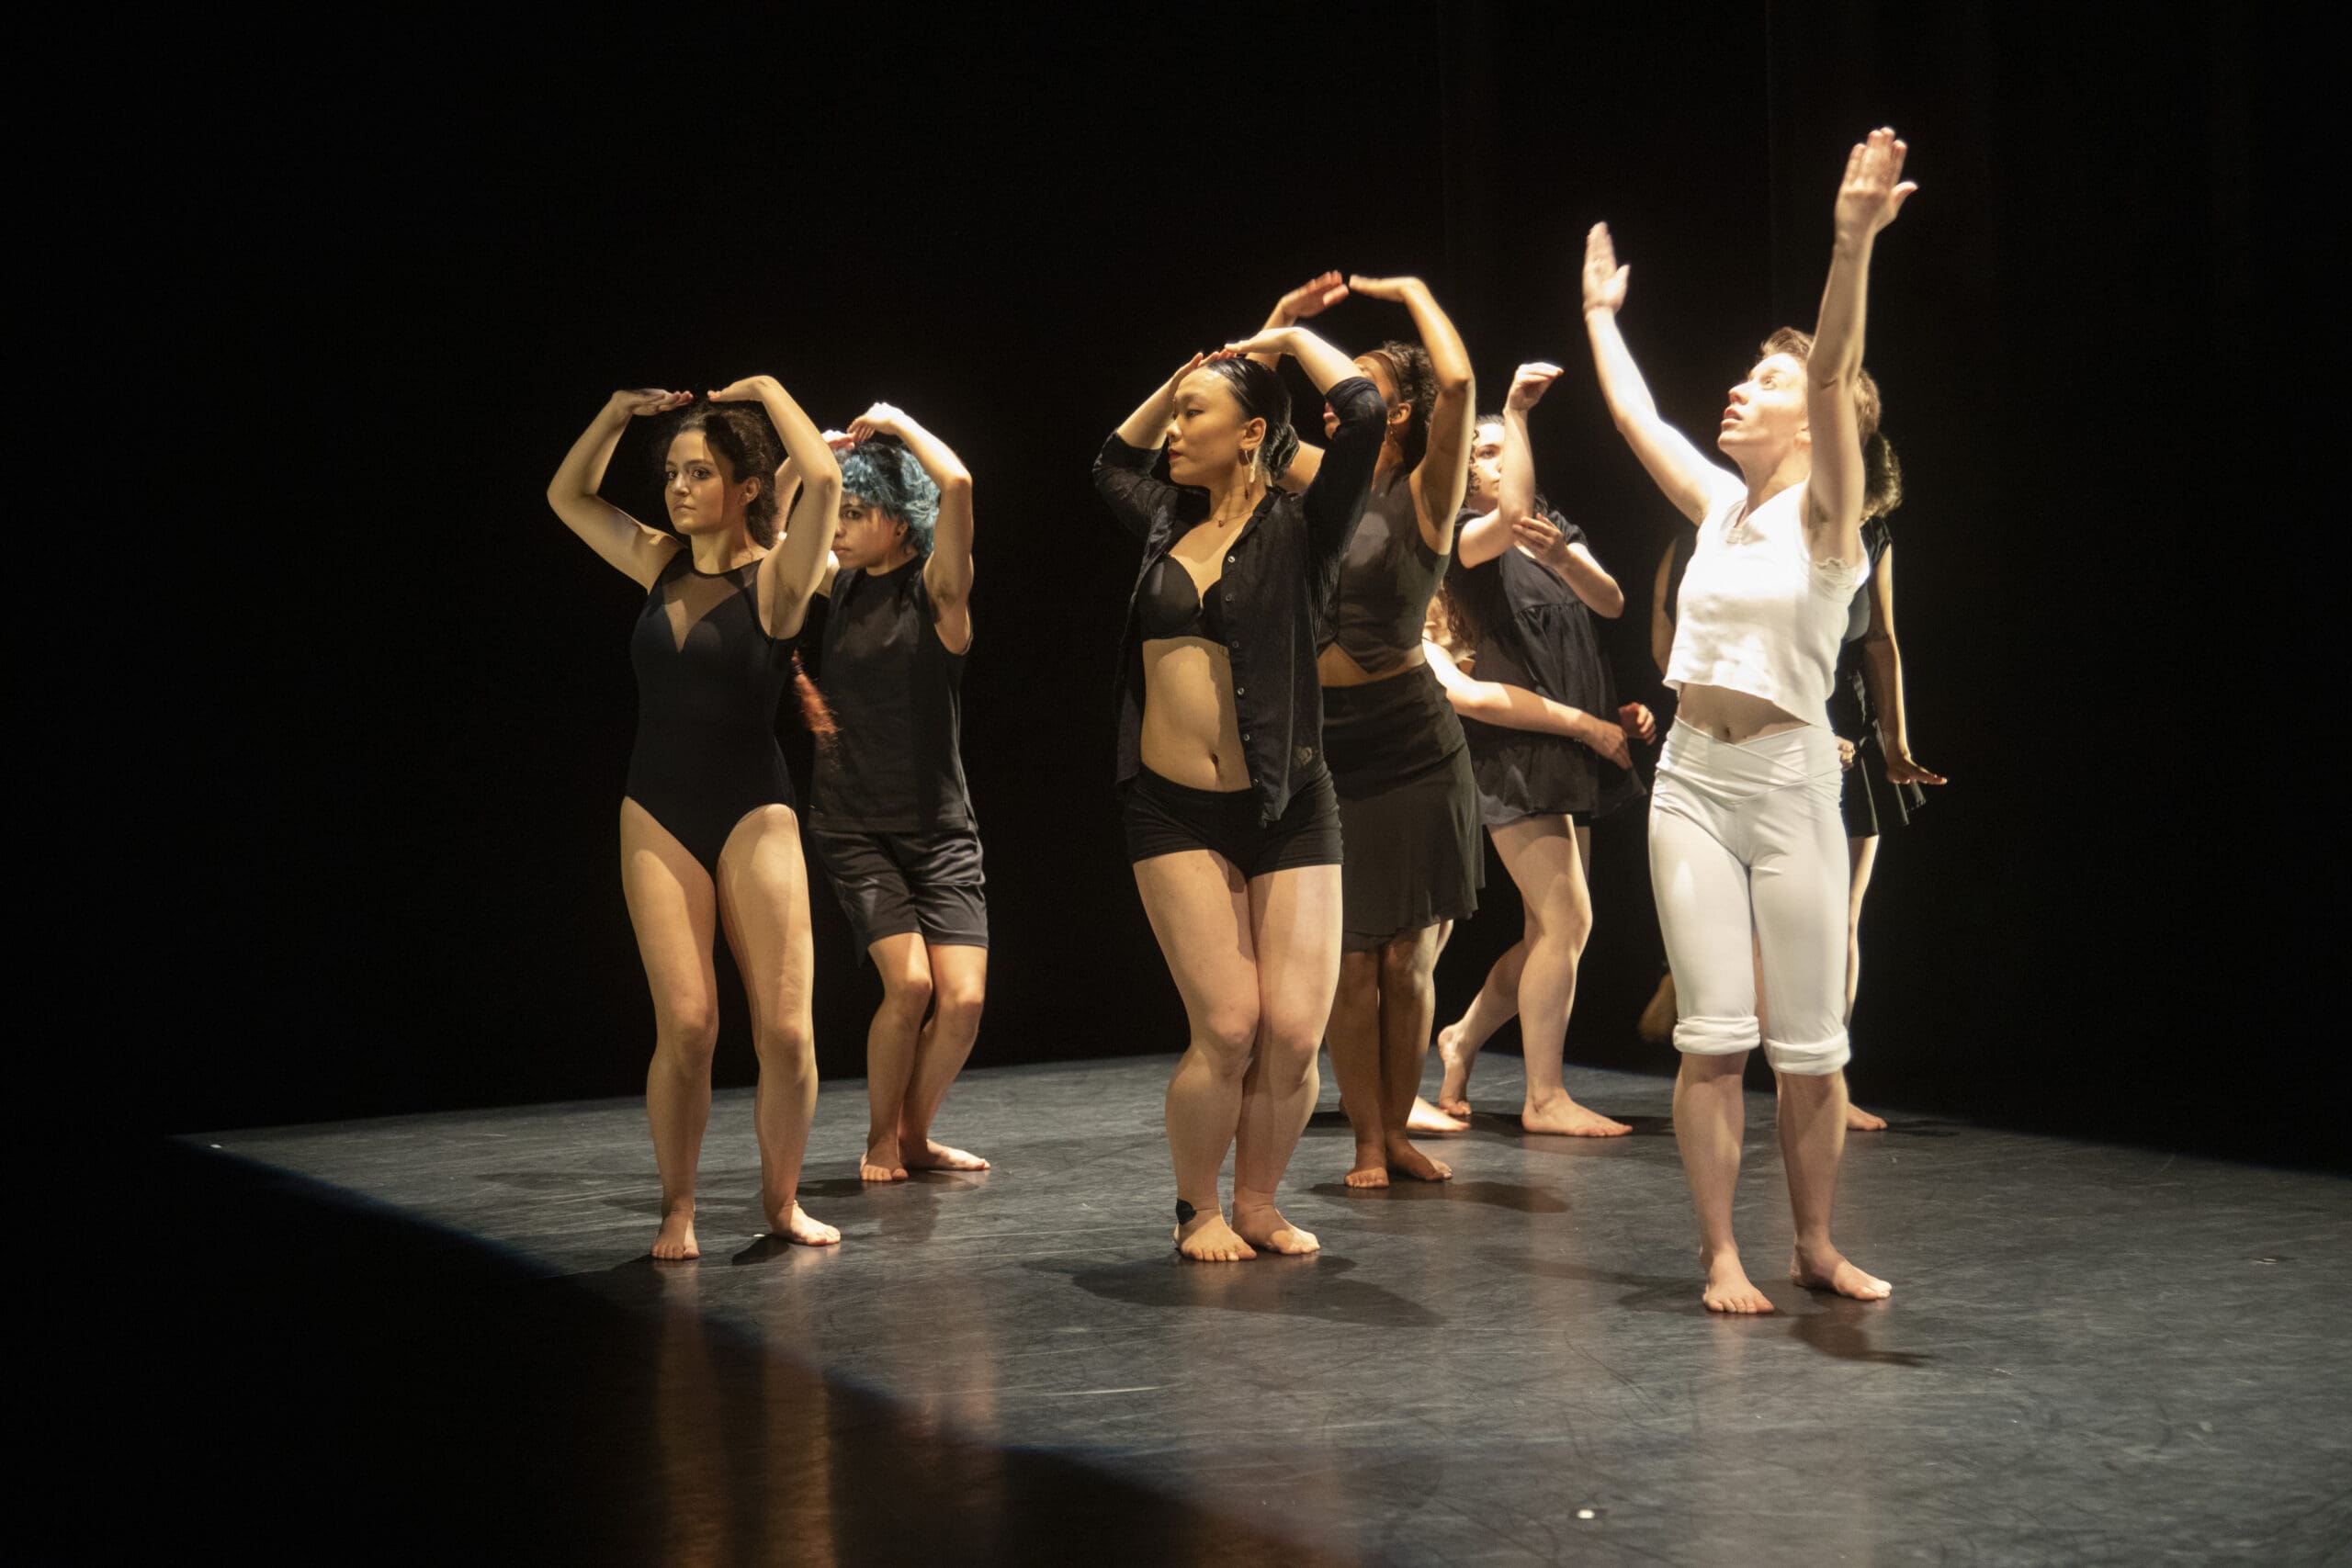 Pictured: Lang Dance students performing Continuous Replay by Bill T. Jones and Arnie Zane
in Spring 2023. Photo credit: Frank Mullaney